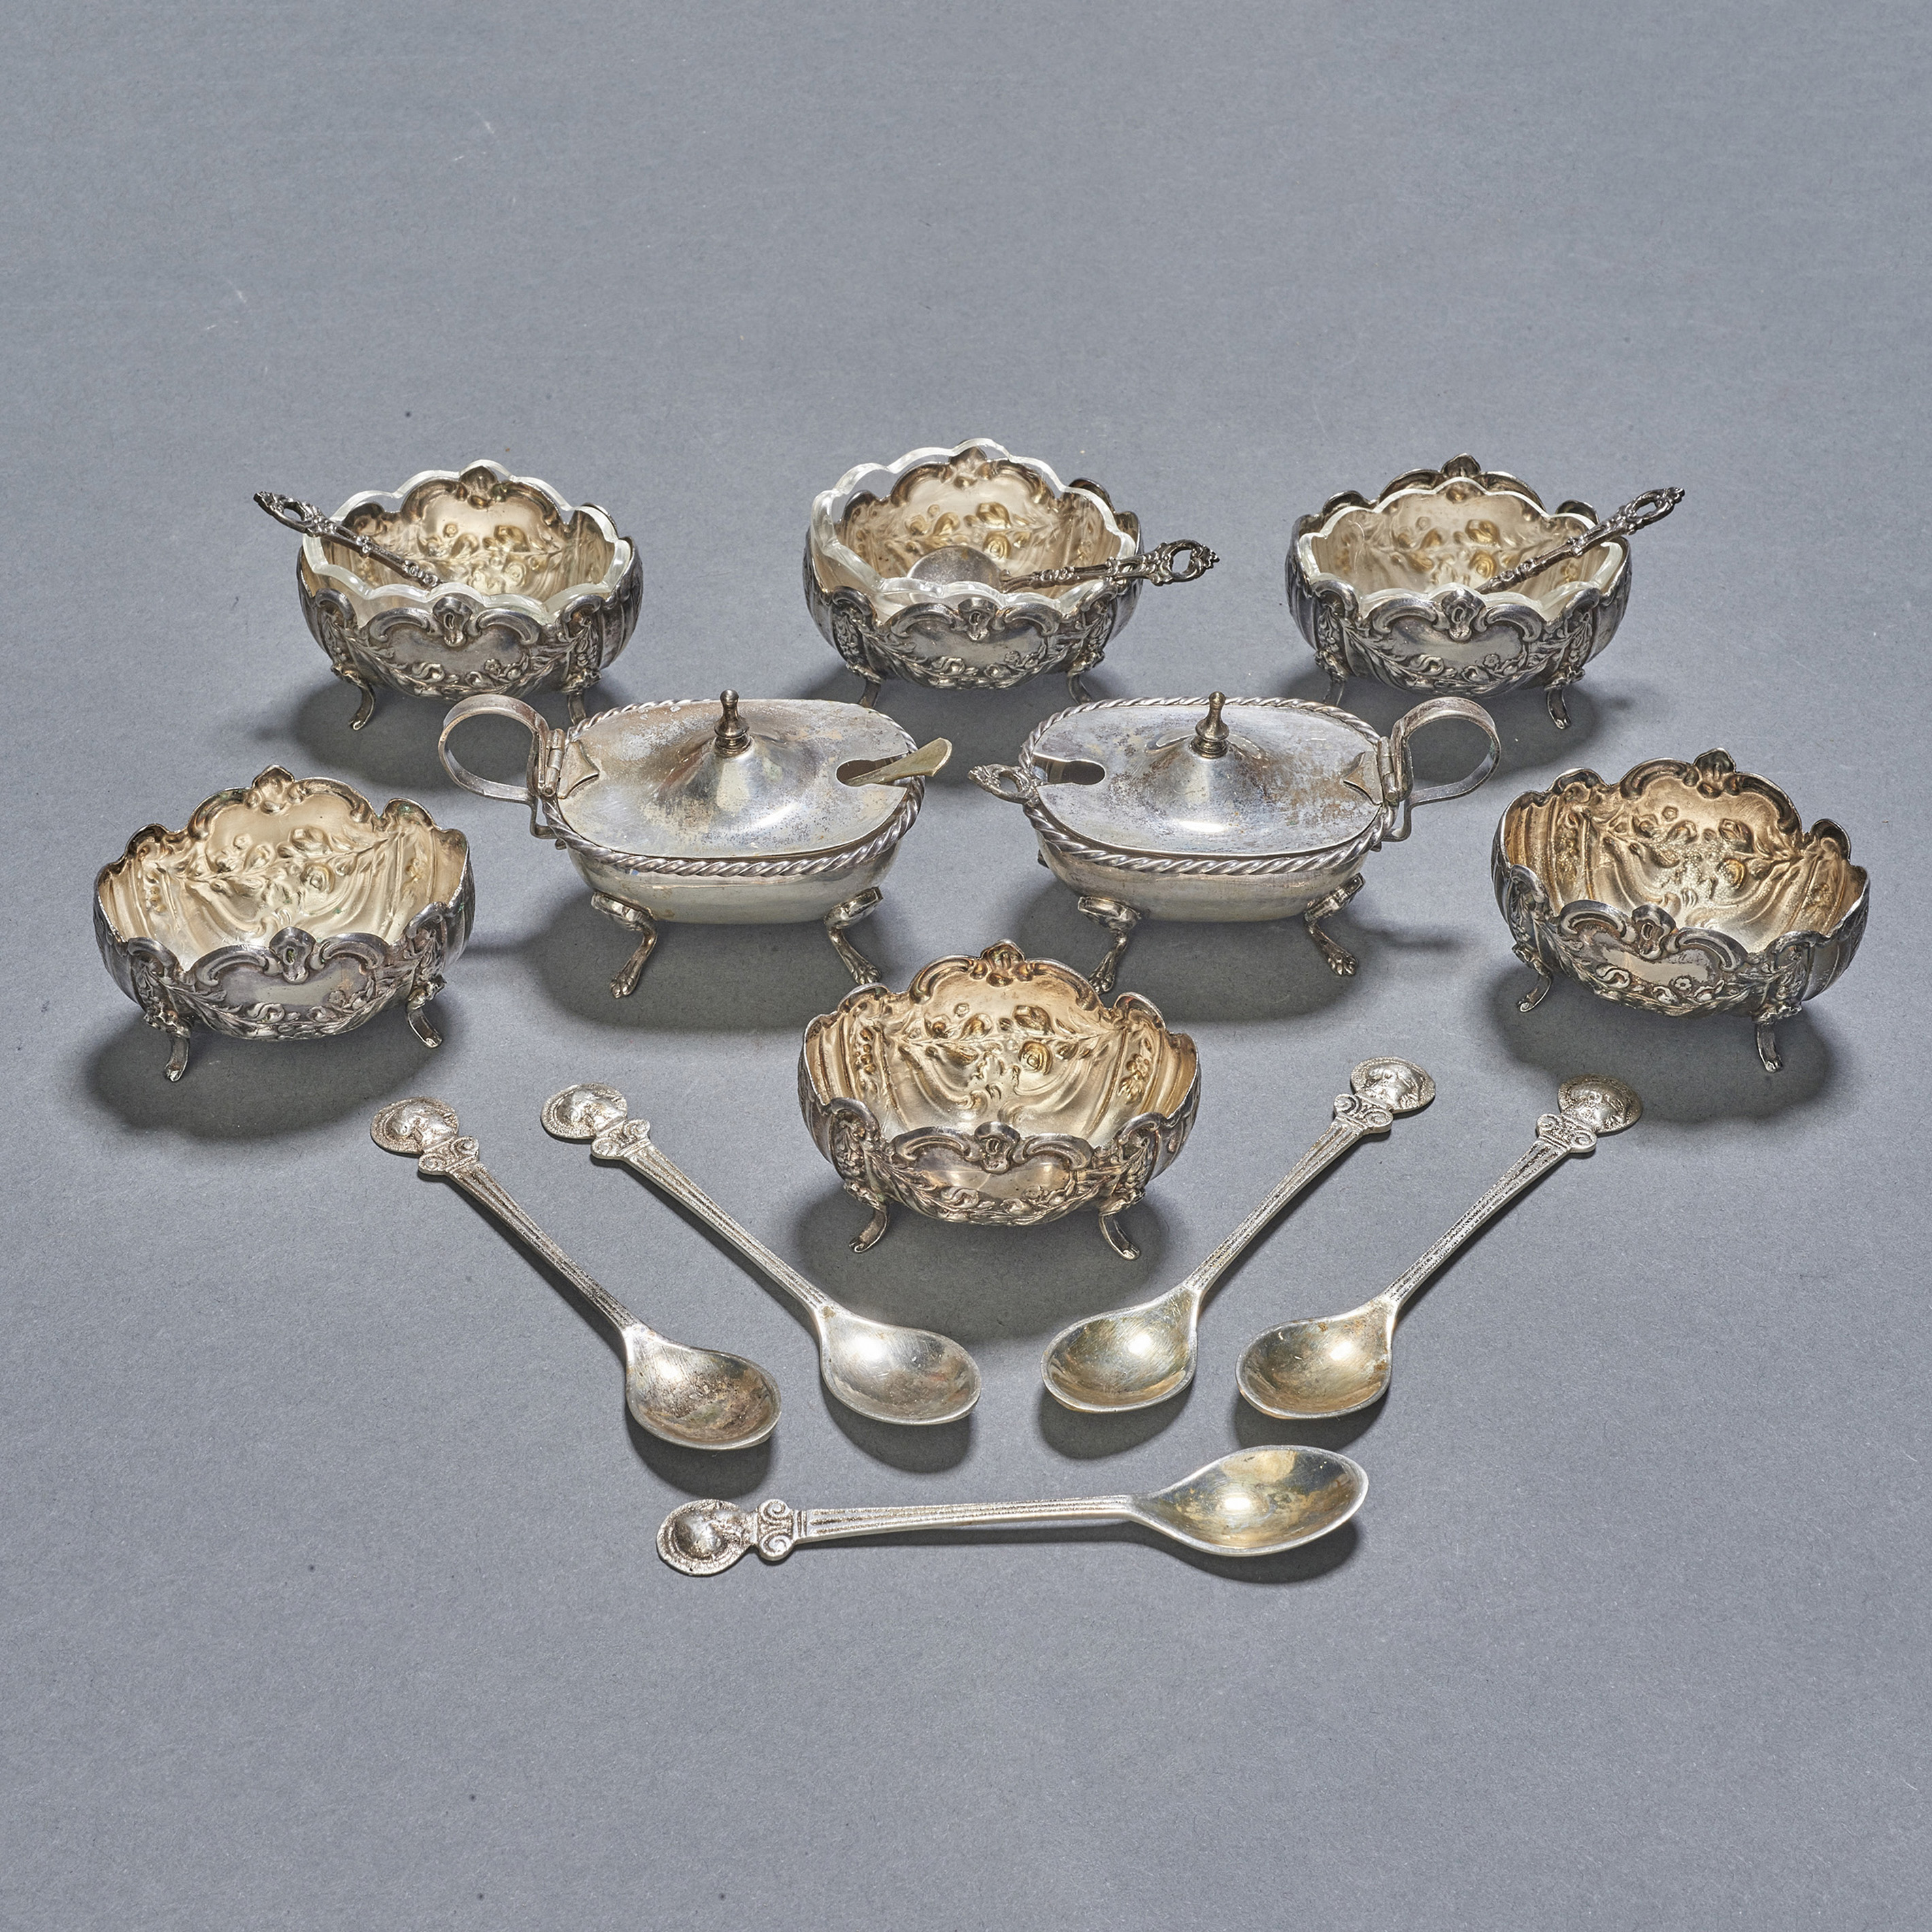  LOT OF 8 GERMAN 800 SILVER TABLE 3a4362